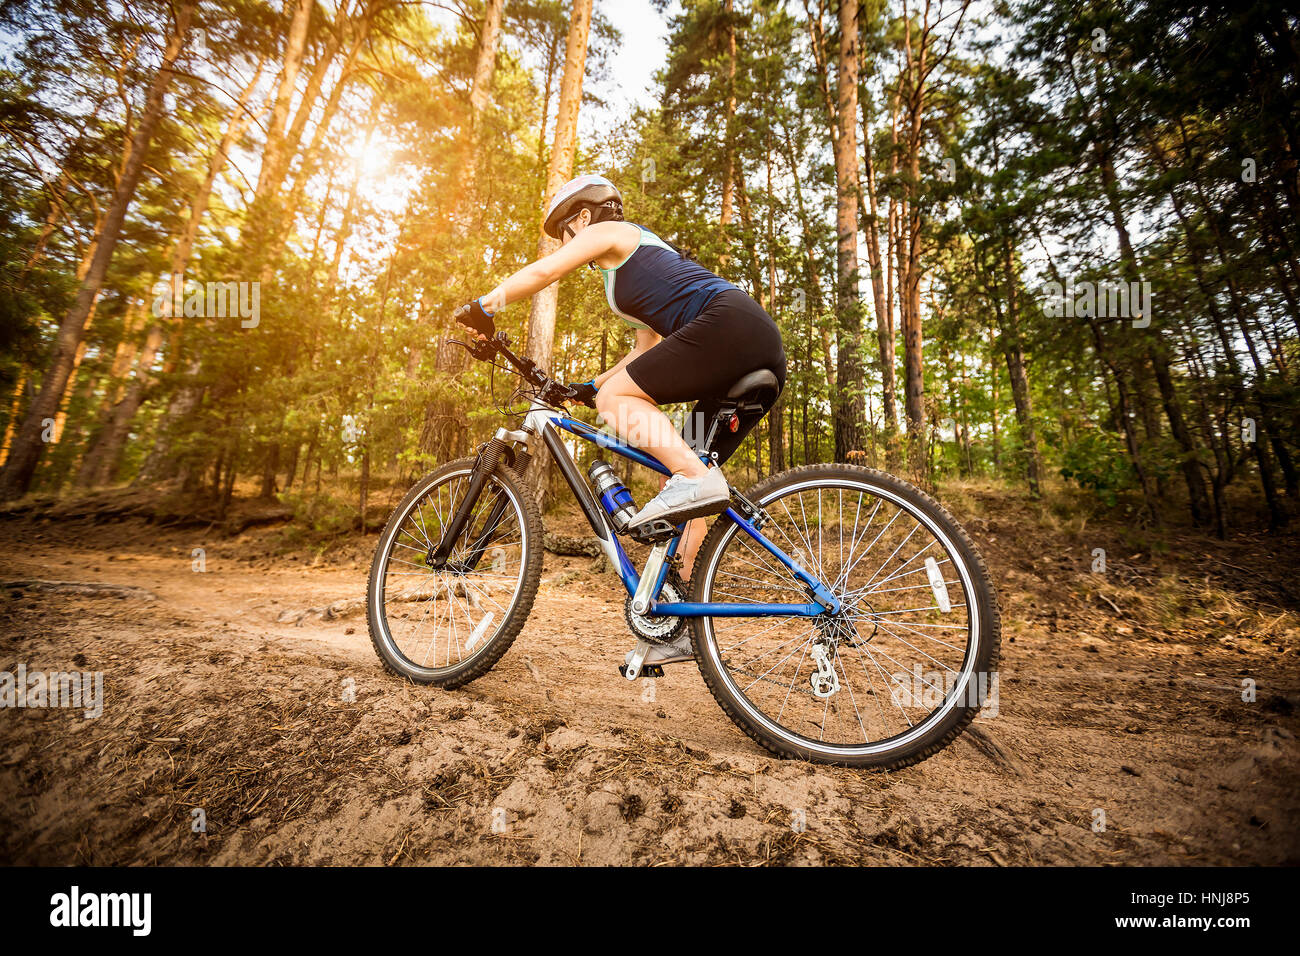 Women on the nature of riding a bike Stock Photo